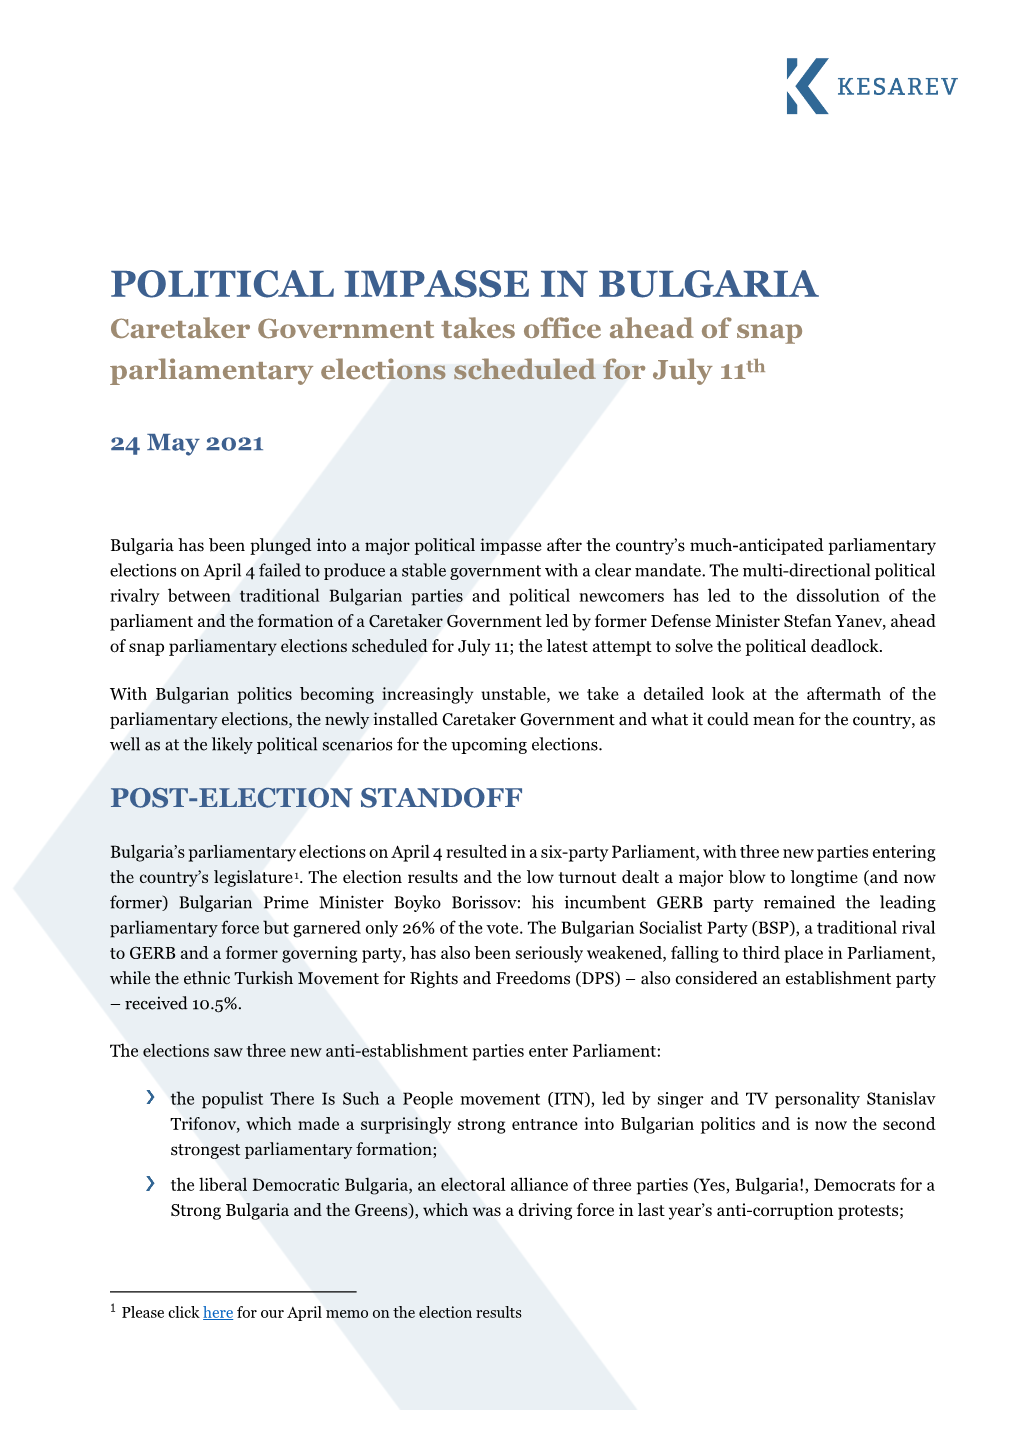 POLITICAL IMPASSE in BULGARIA Caretaker Government Takes Office Ahead of Snap Parliamentary Elections Scheduled for July 11Th